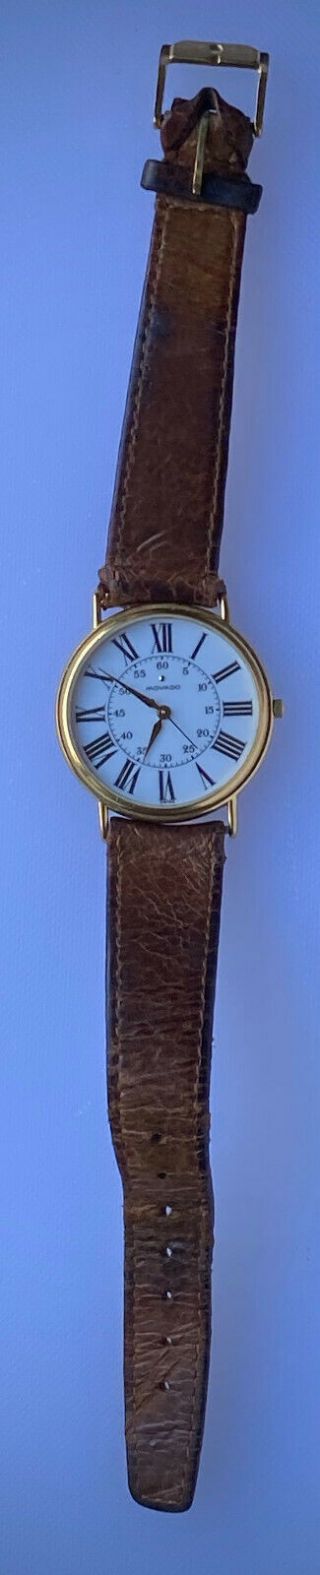 Vintage Movado Old Timer 87 - 59 - 885 Gold Tone Leather Band Watch Swiss Wristwatch